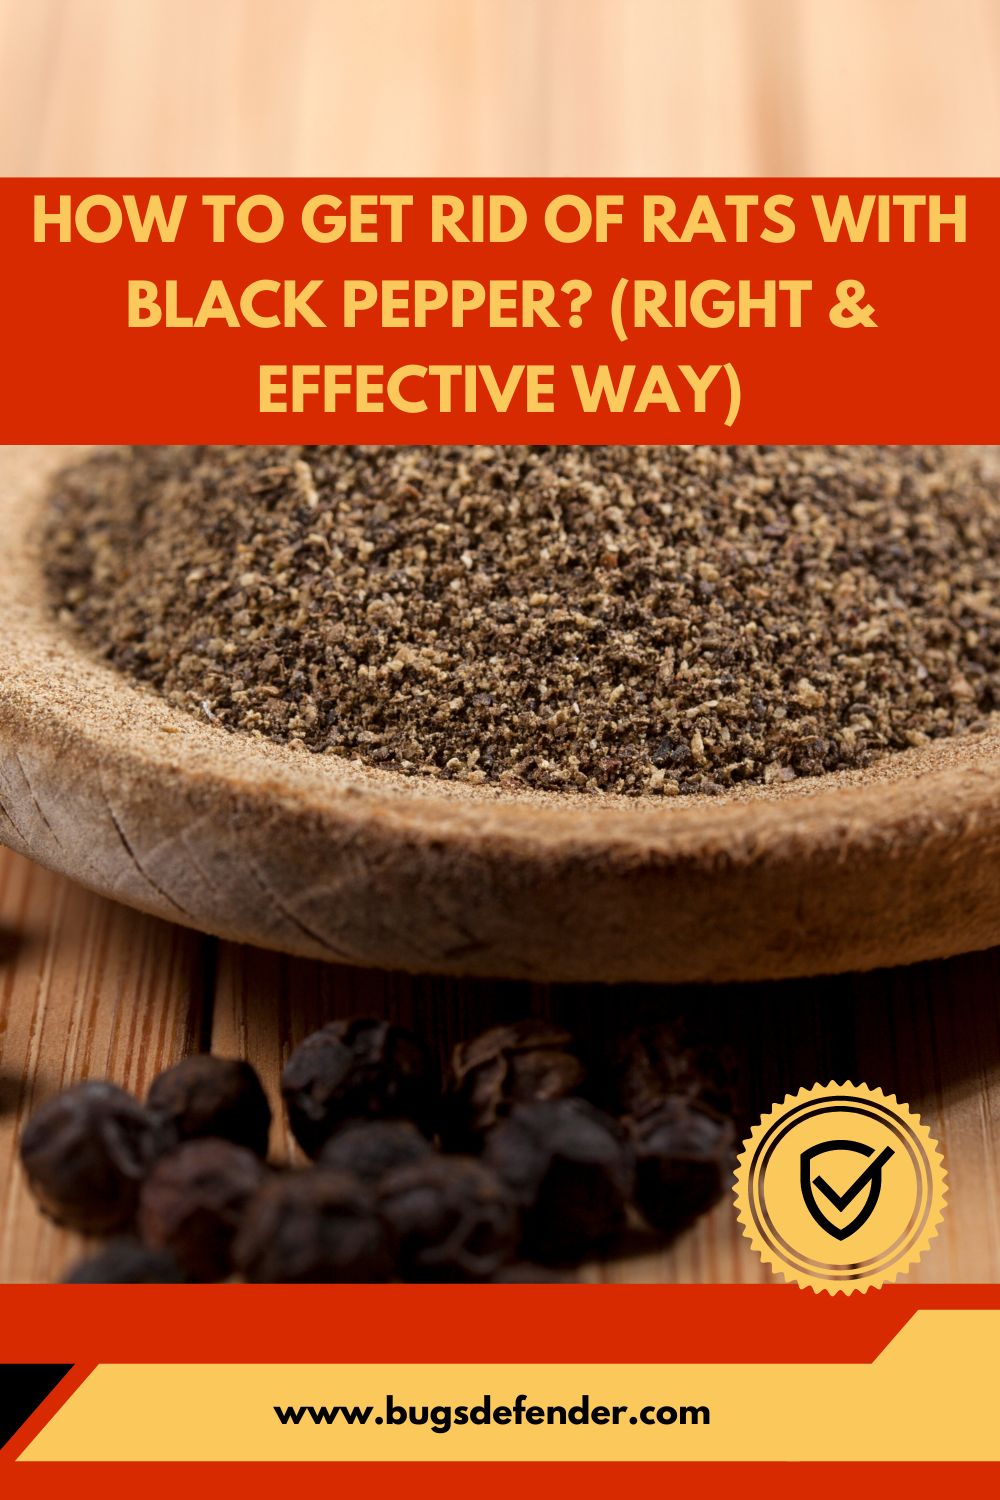 How To Get Rid Of Rats With Black Pepper? (Right & Effective Way) pin2